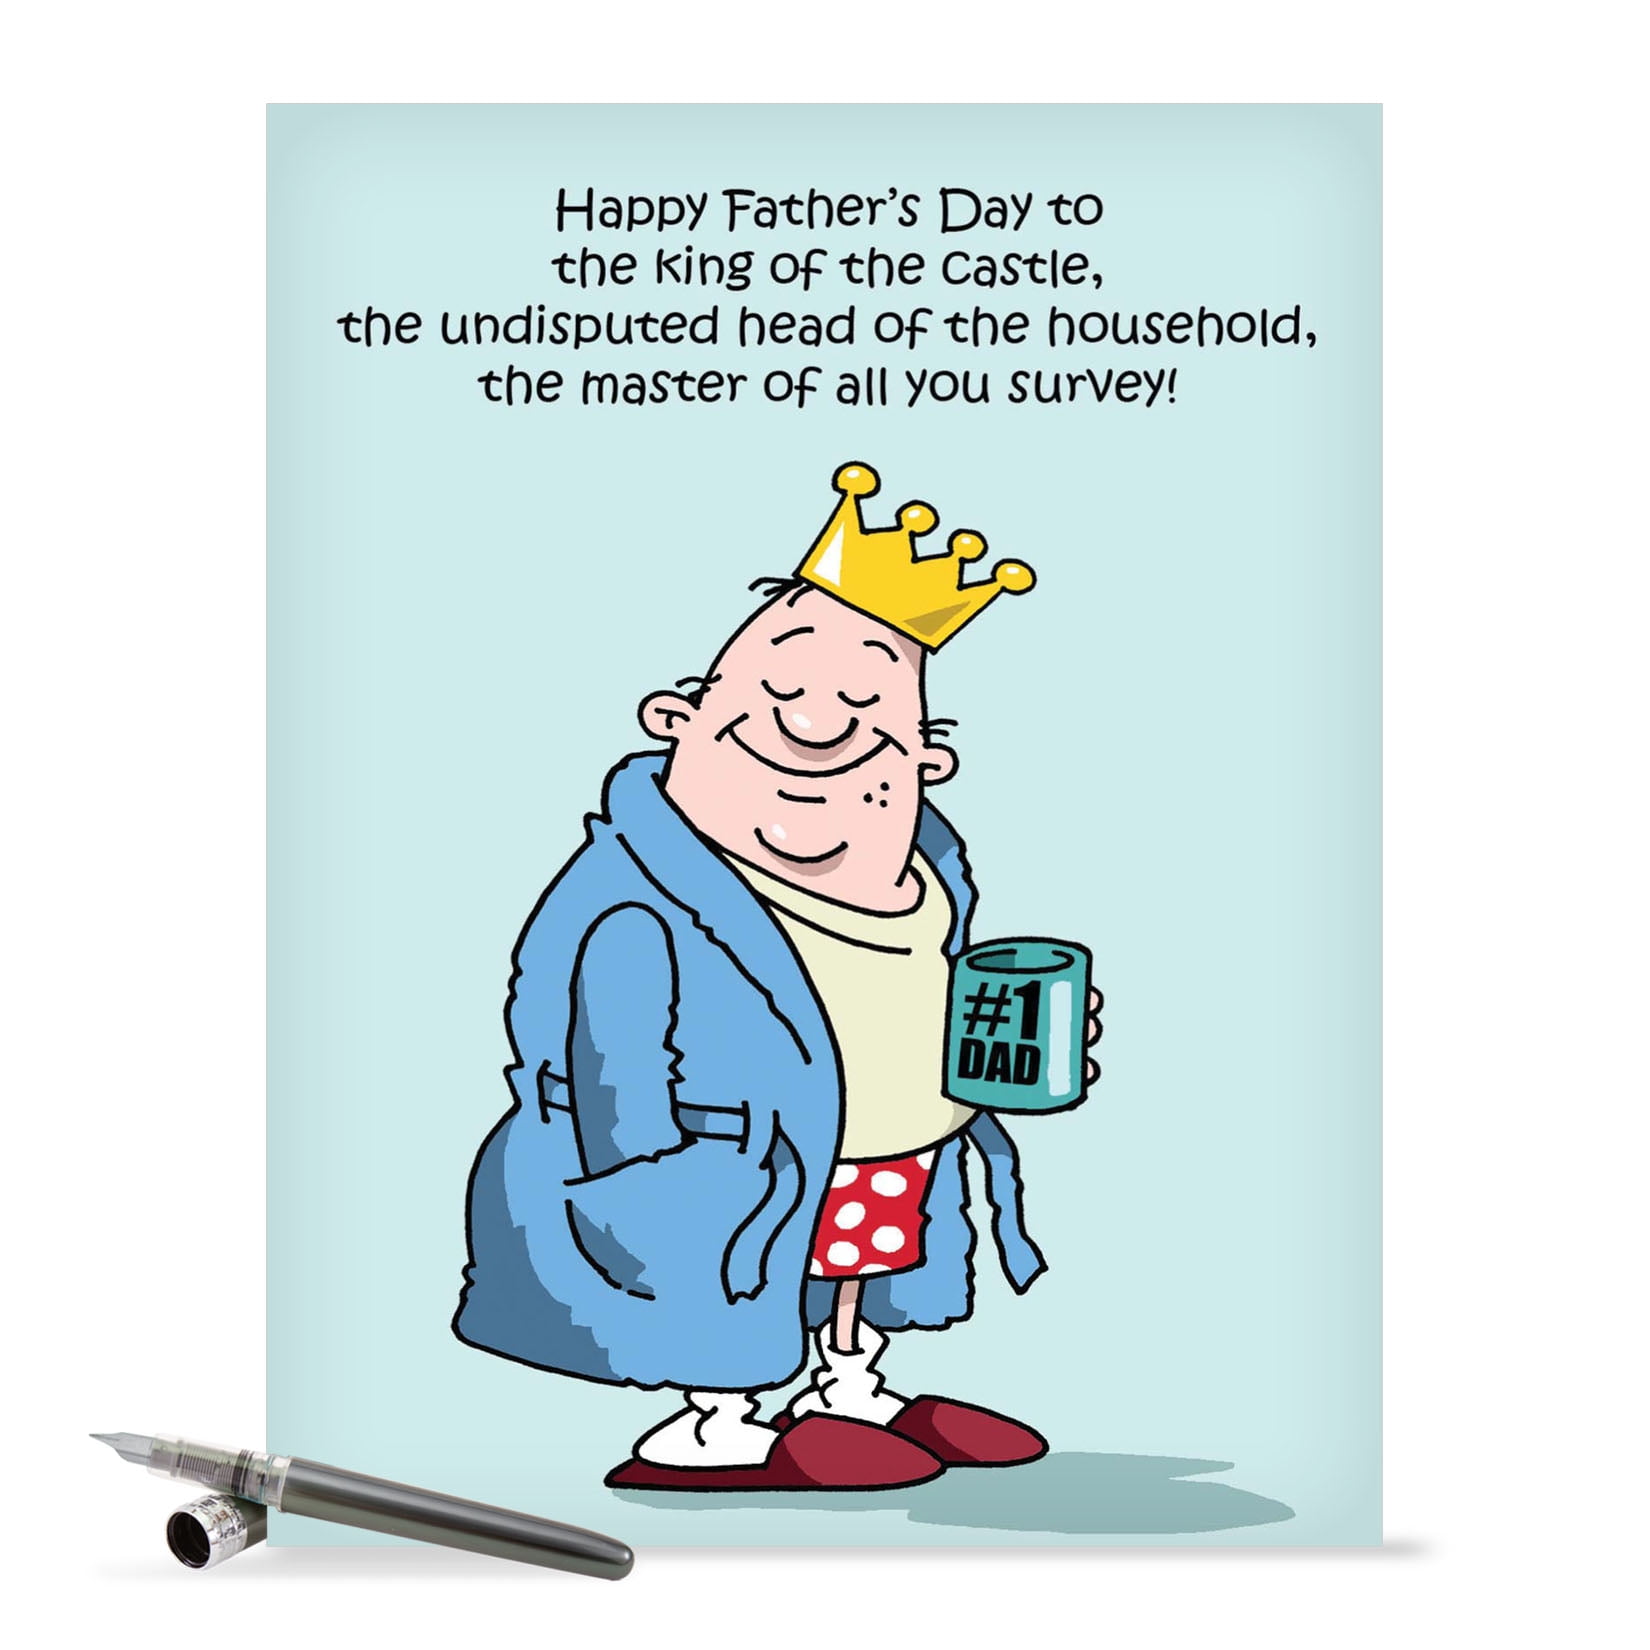 j0239 jumbo funny fathers day greeting card king of the